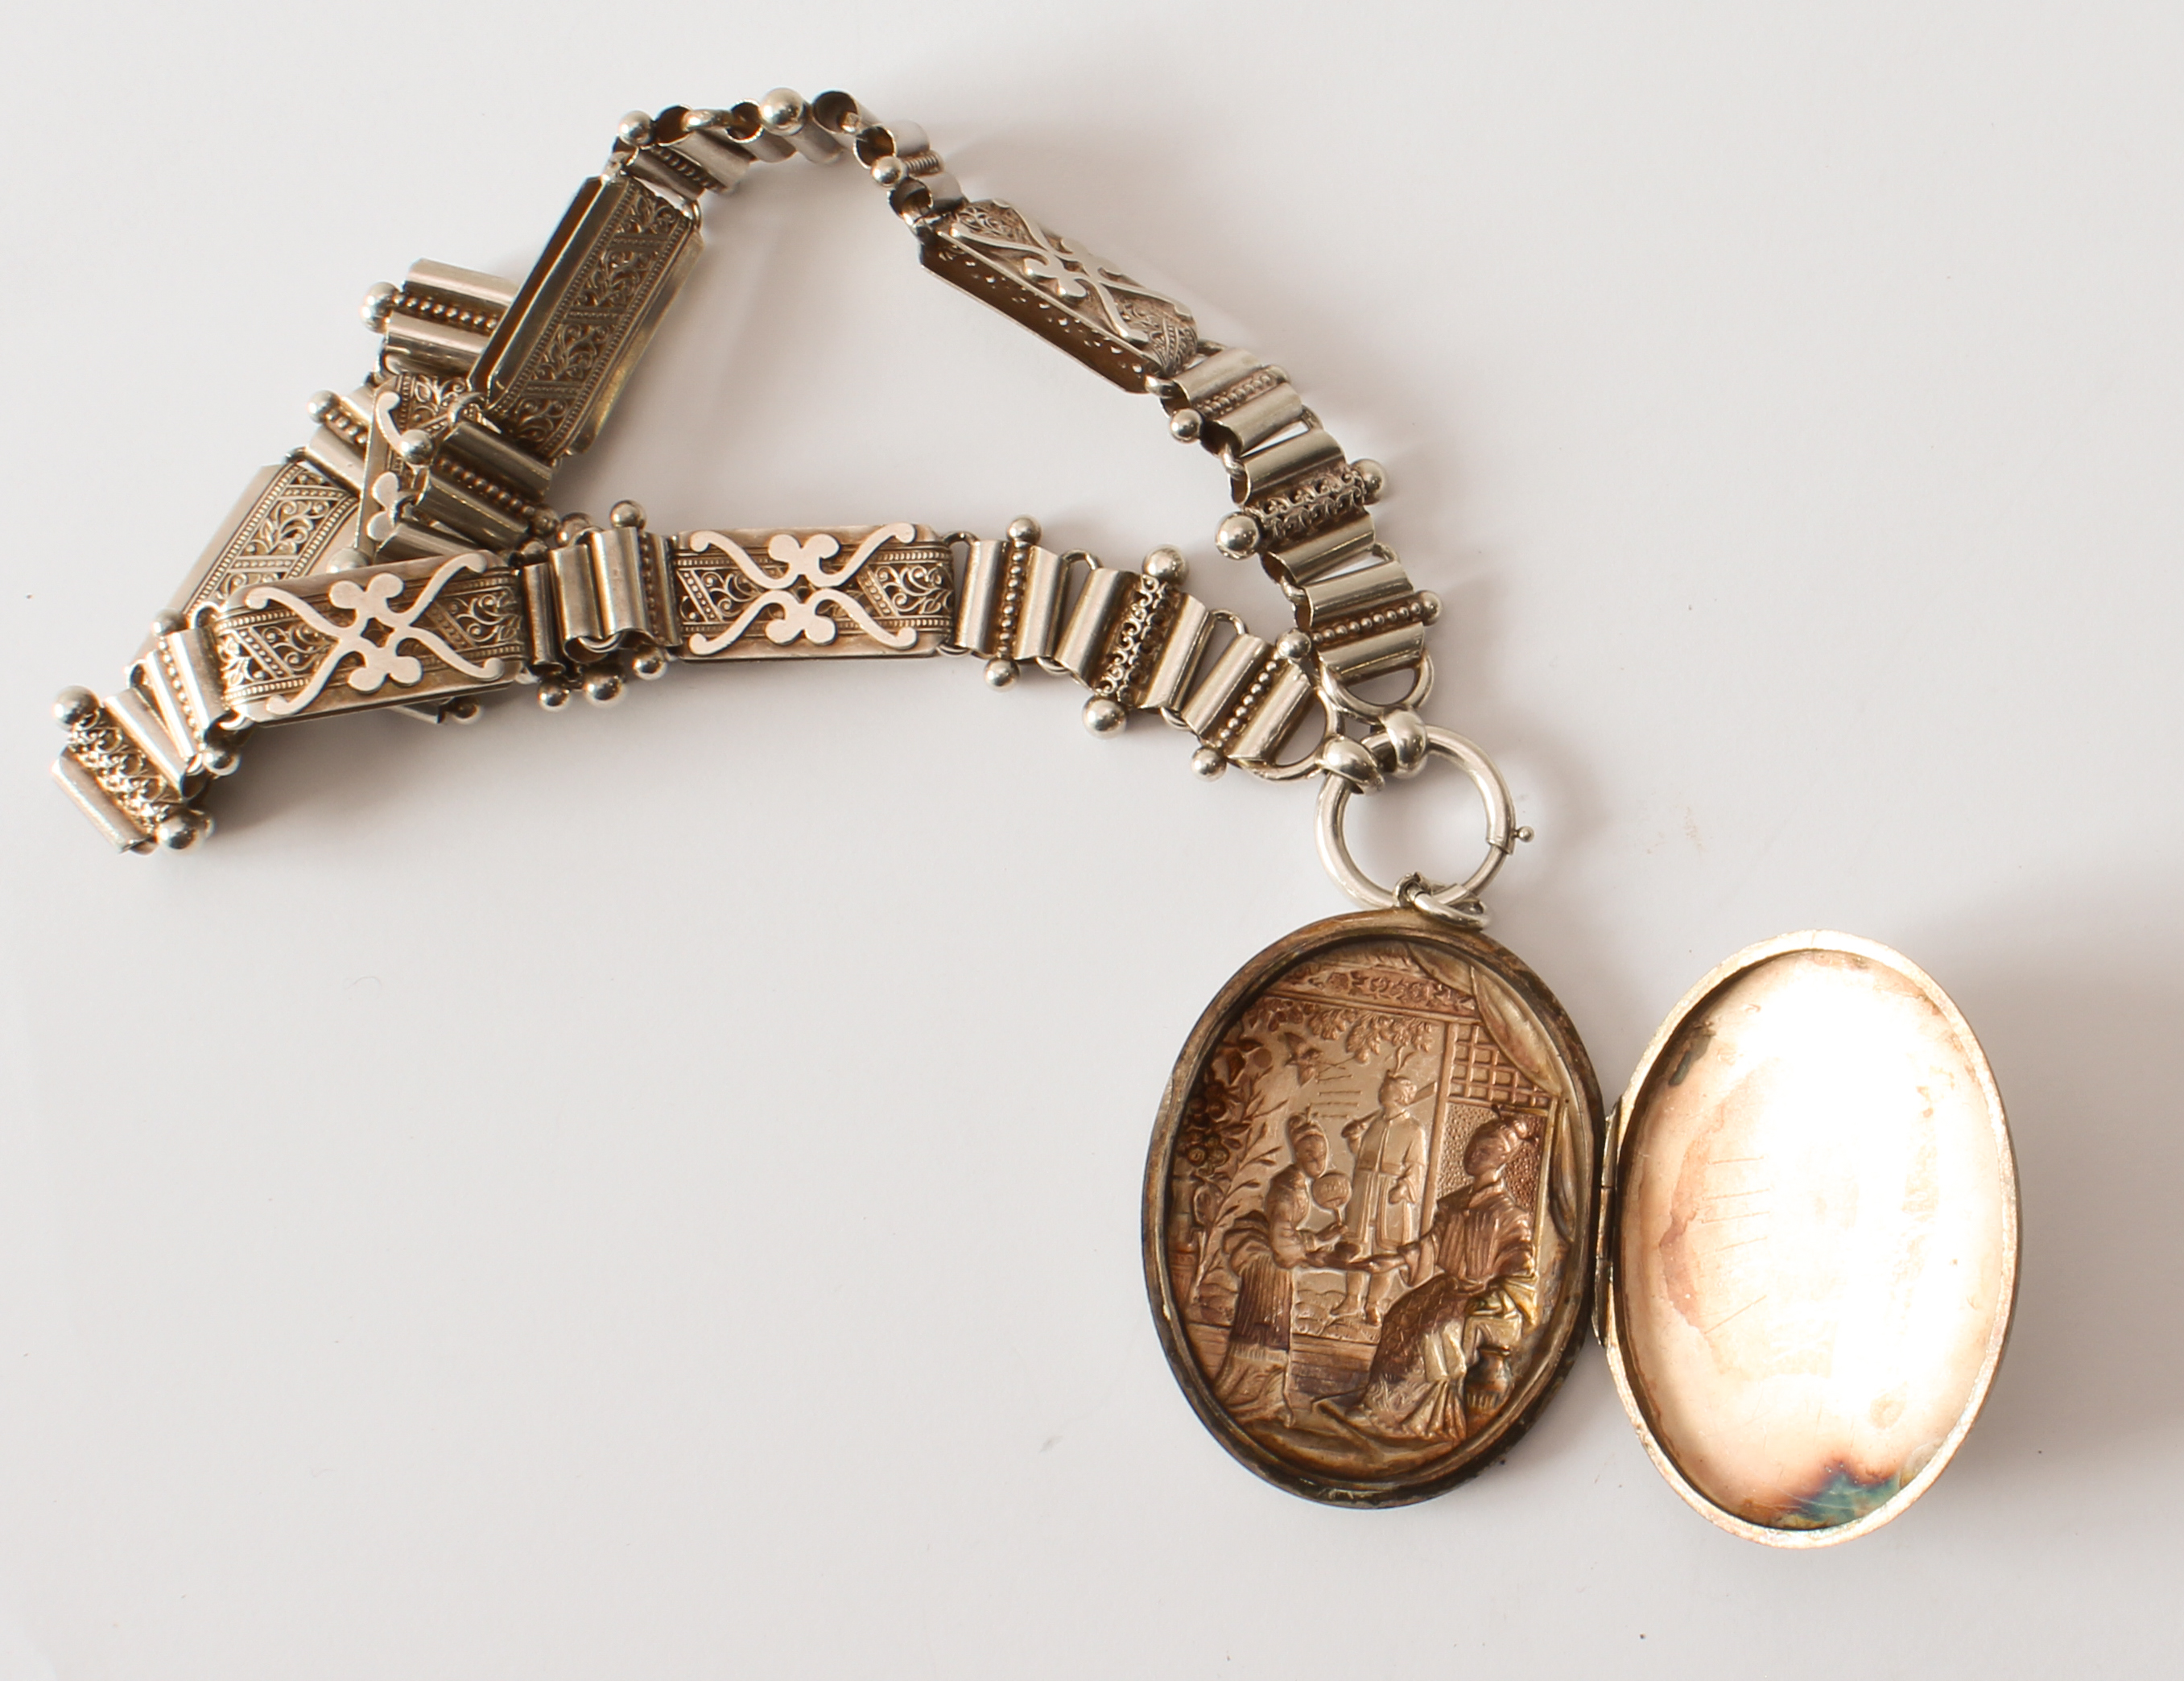 An early 20th century sterling silver necklace with silver-plated pendant locket - the pendant 50 - Image 4 of 8